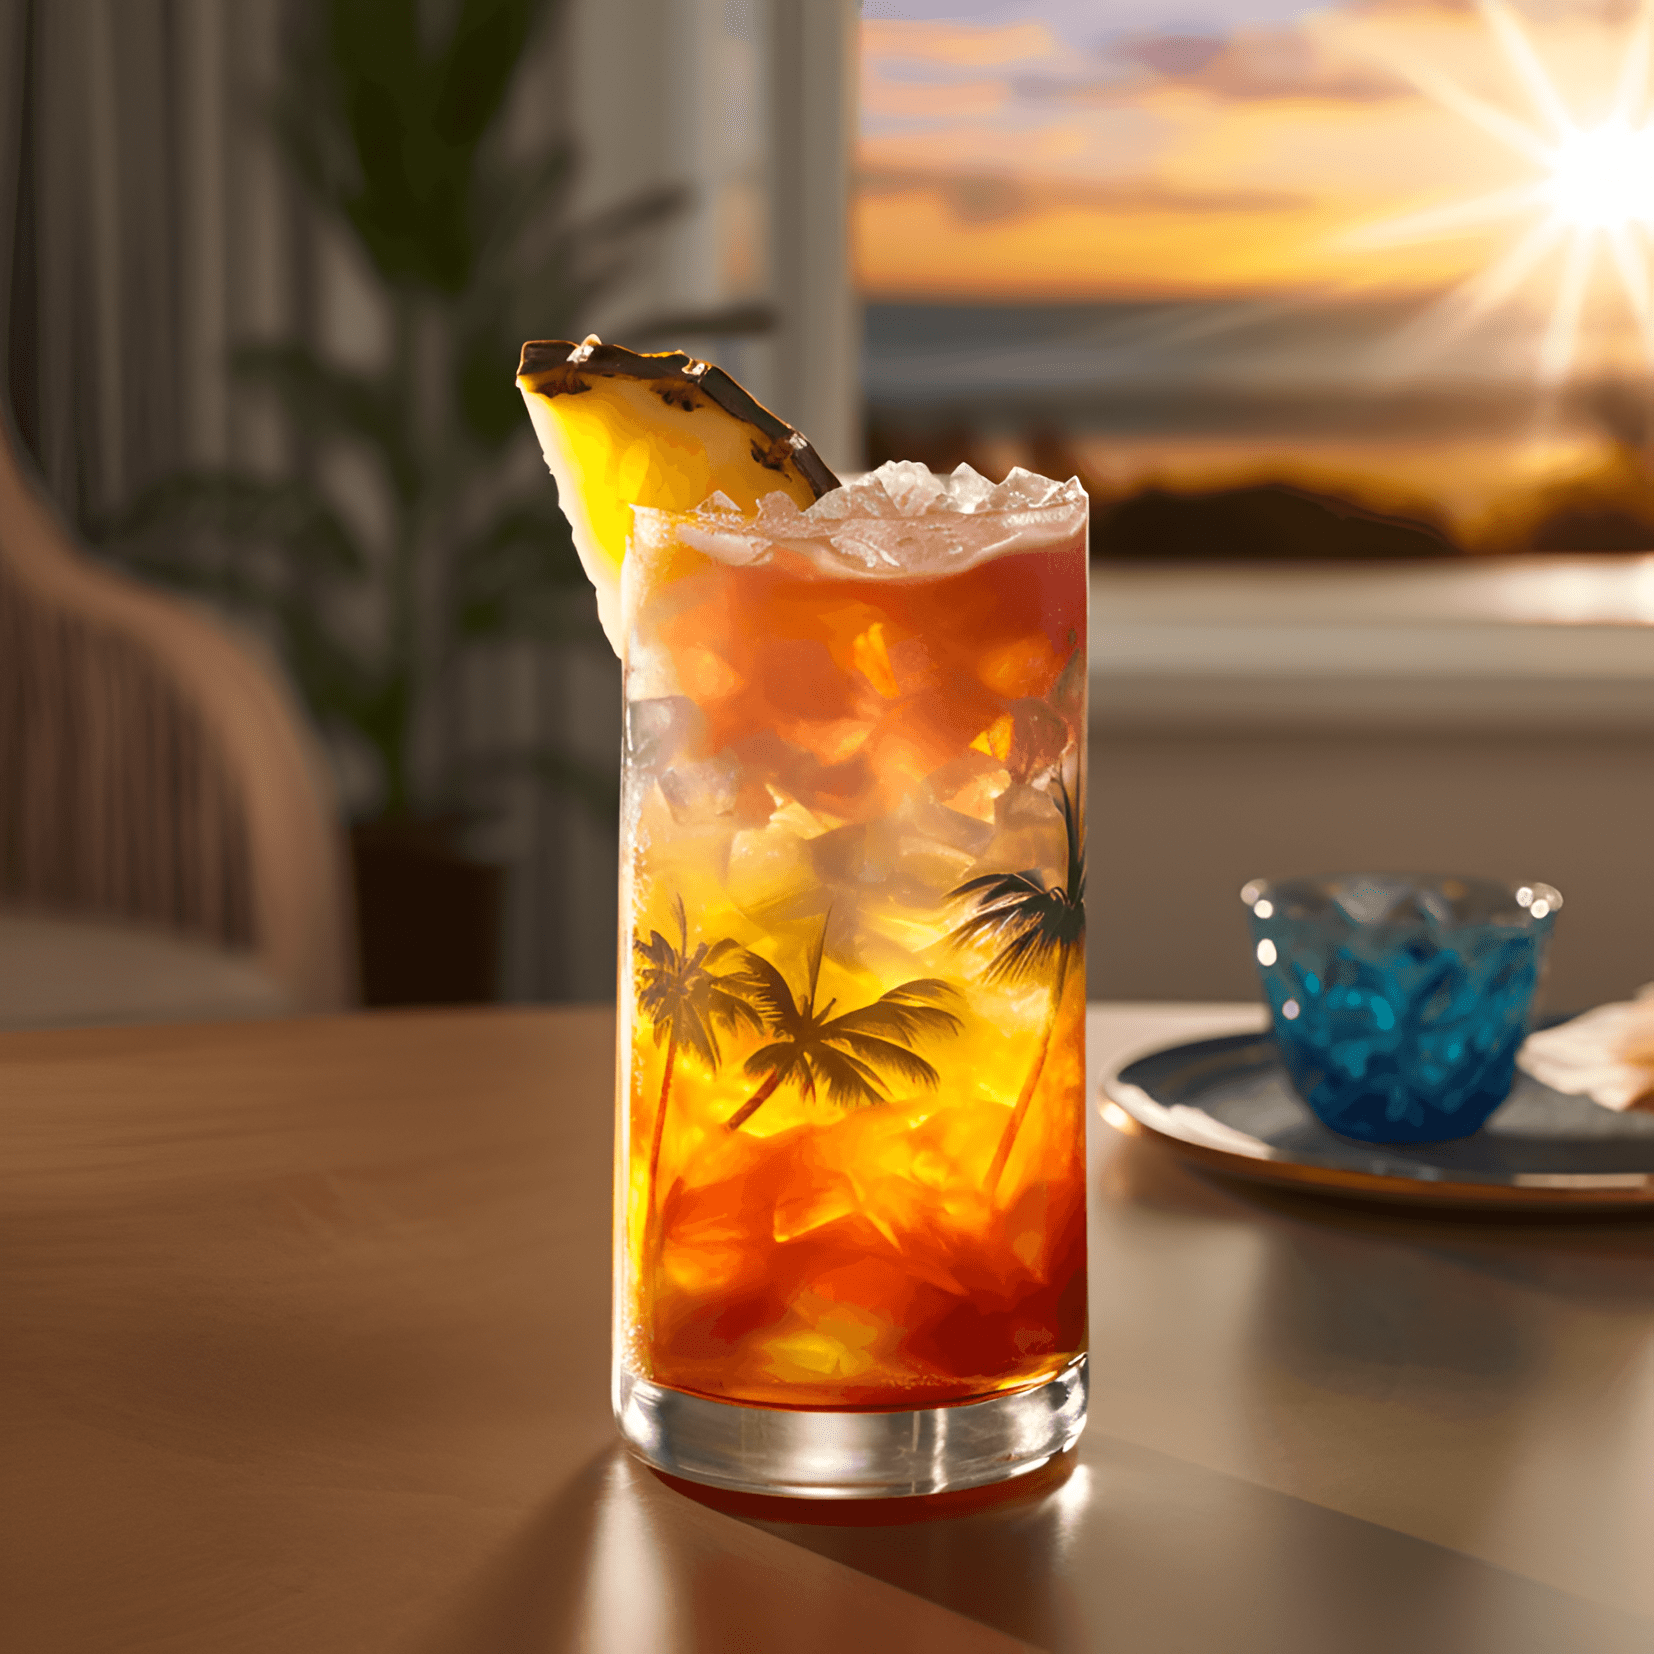 Bay Breeze Cocktail Recipe - The Bay Breeze is a sweet, fruity, and refreshing cocktail with a tropical twist. The combination of vodka, cranberry juice, and pineapple juice creates a well-balanced flavor profile that is neither too sweet nor too tart. The drink is light and easy to sip, making it perfect for warm weather and outdoor gatherings.